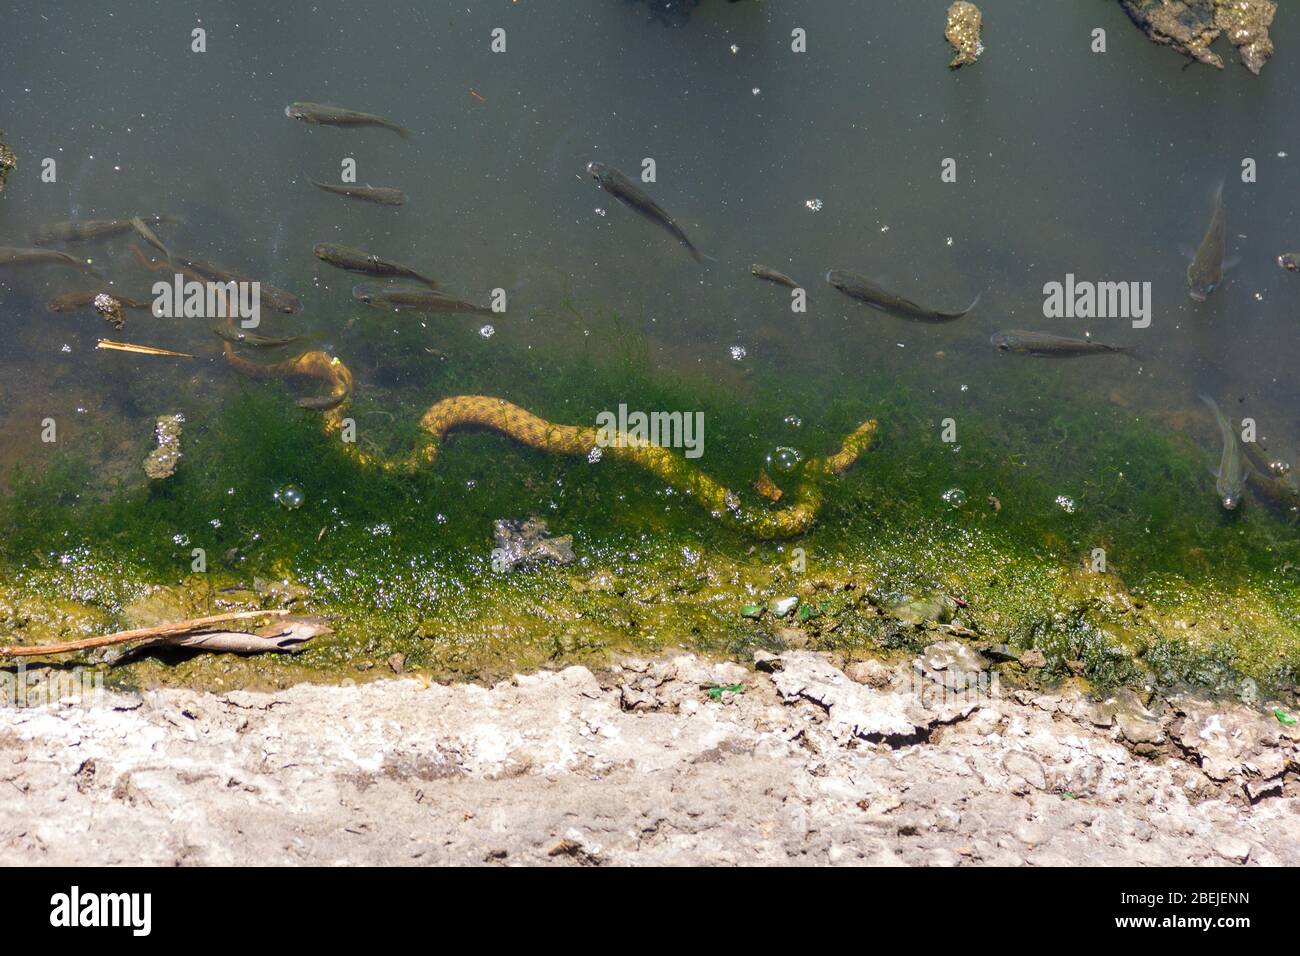 the not poisonous water snake ( Xenochrophis piscator) preys on fish in muddy water in the summer Stock Photo